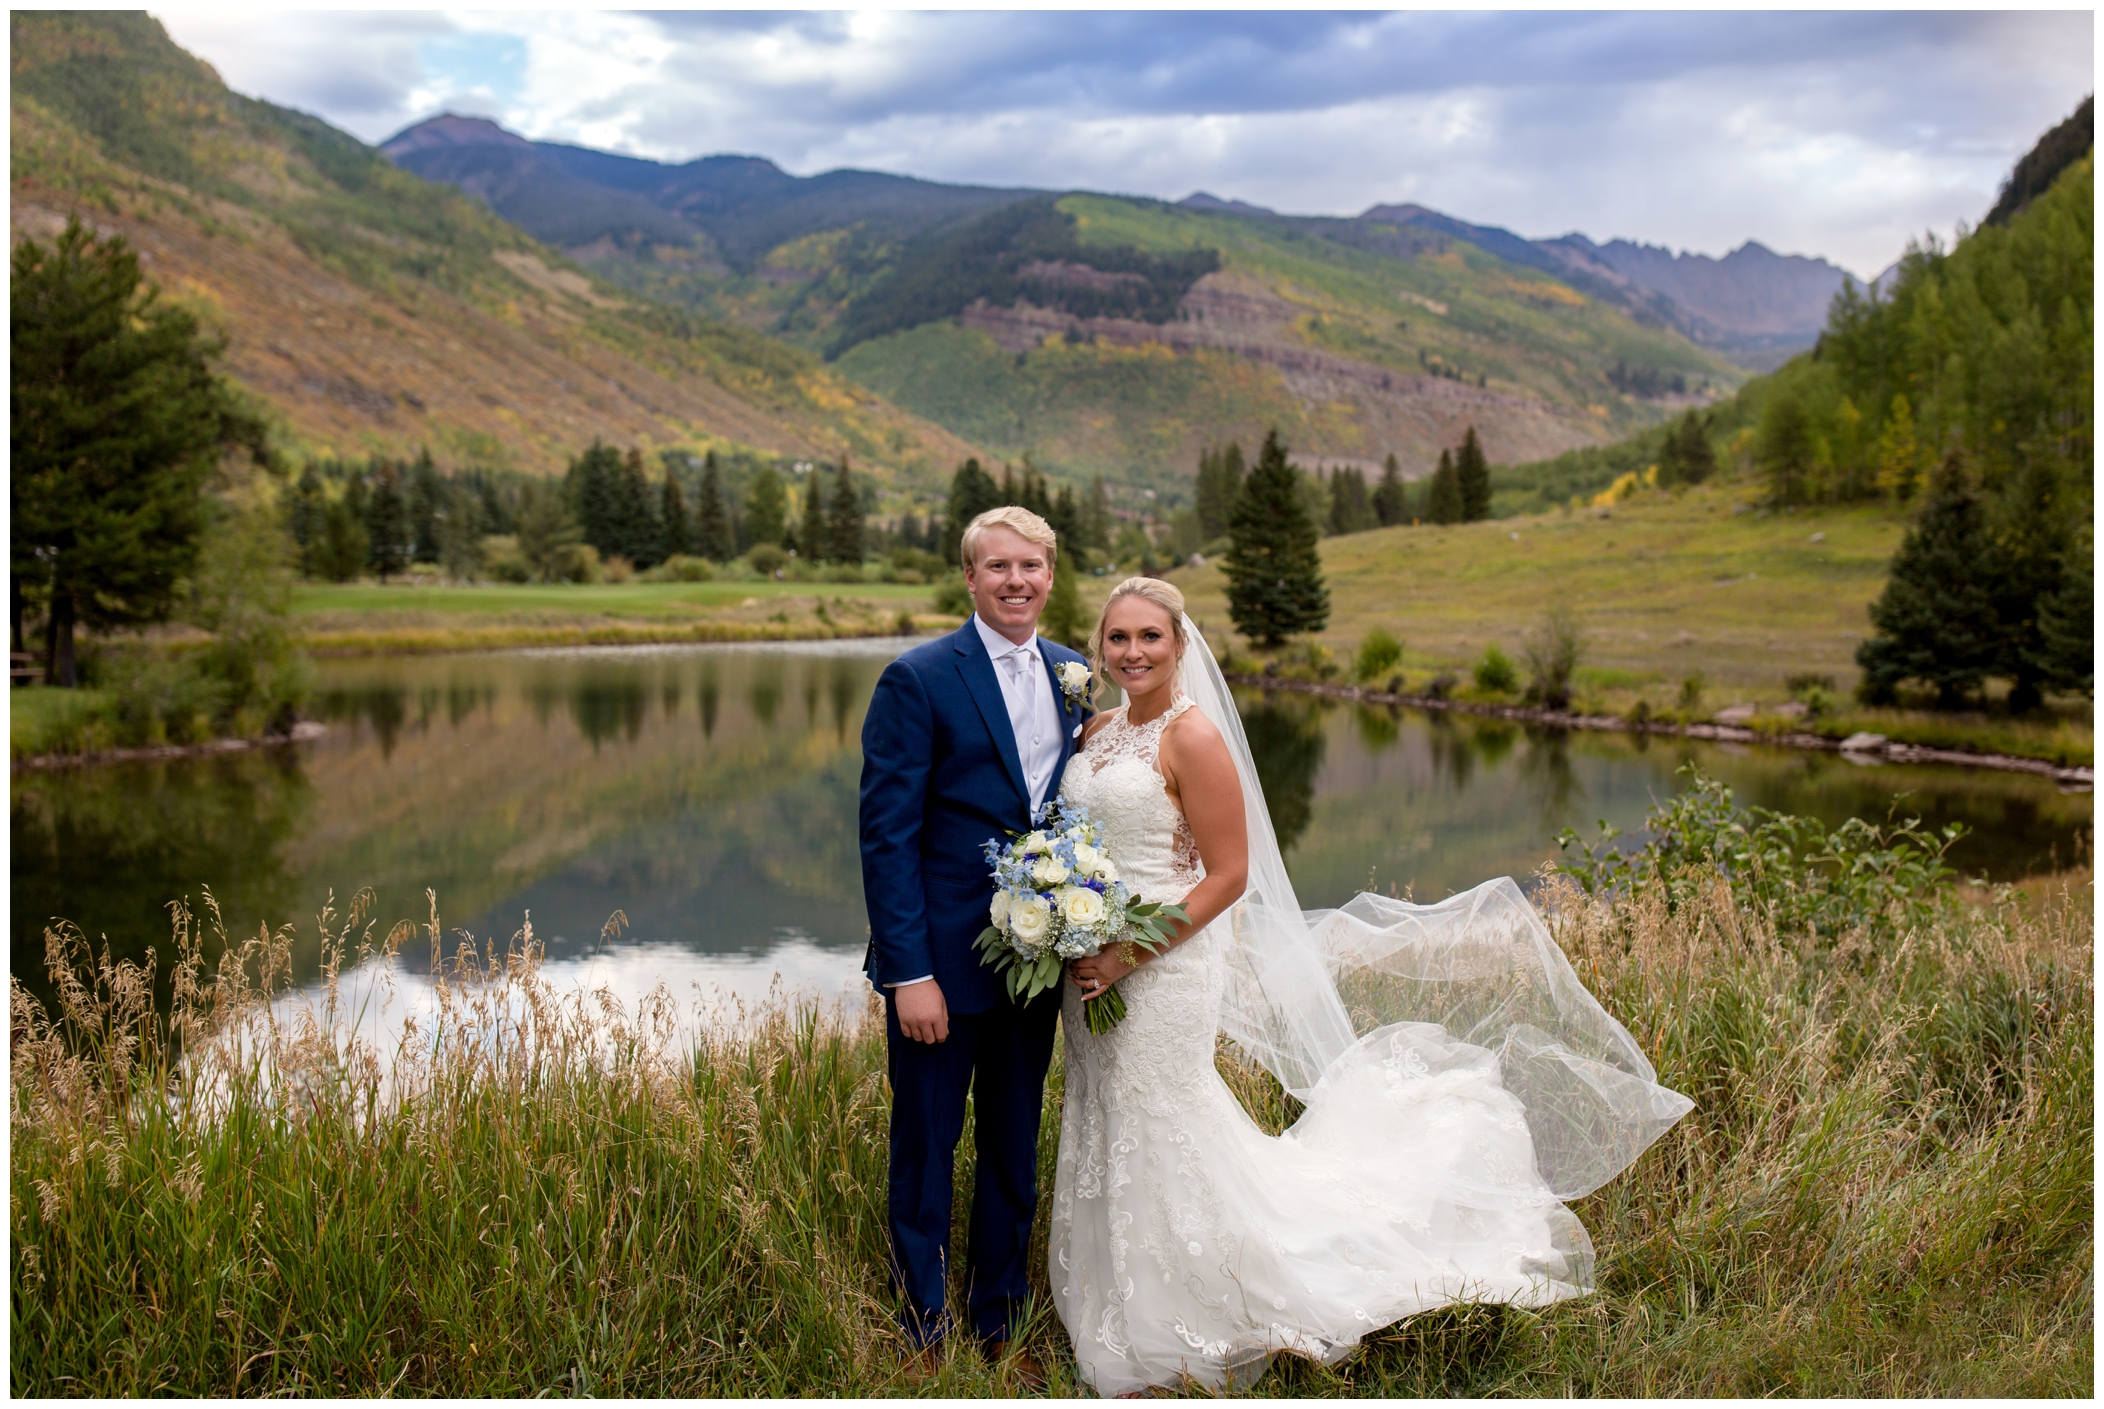 Vail Golf club wedding photos with mountains in the background